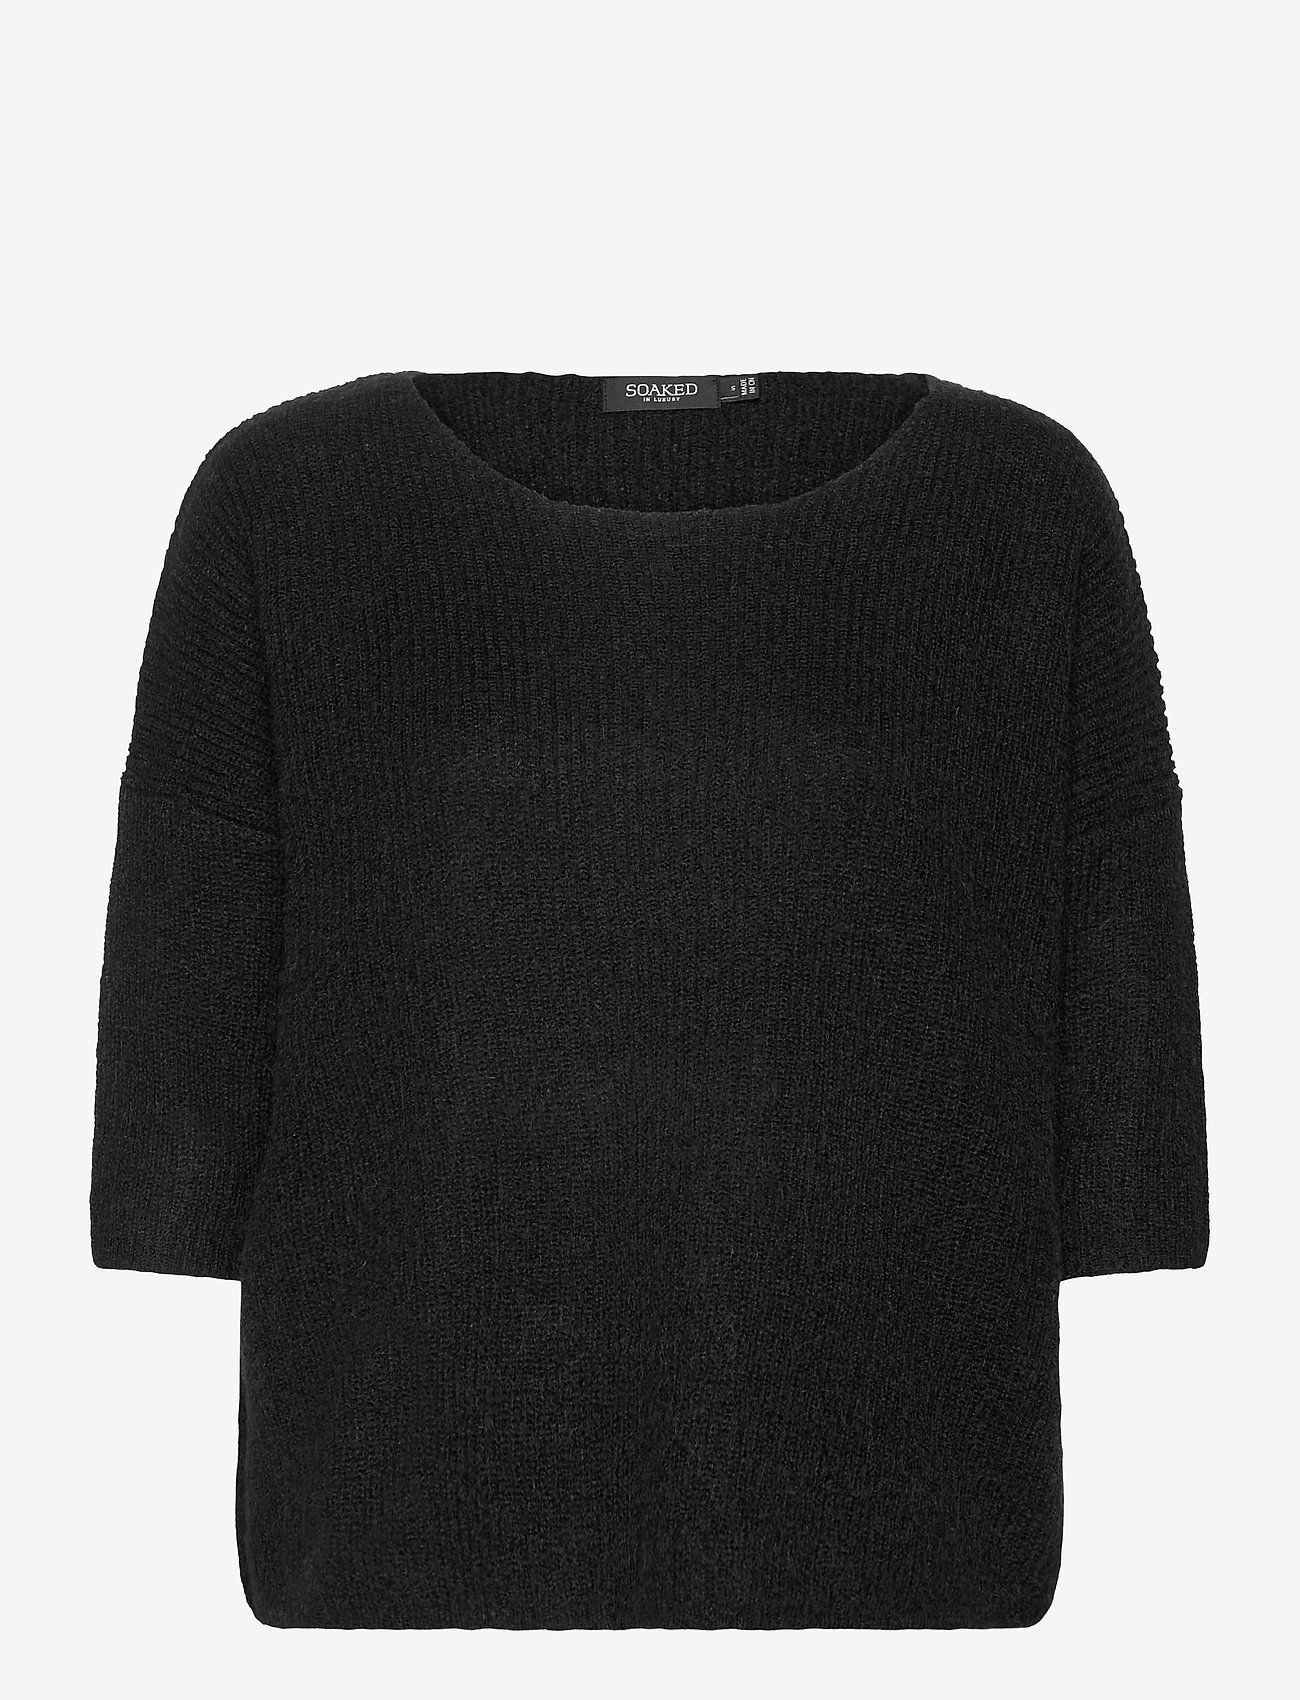 Soaked in Luxury - SLTuesday Jumper - swetry - black - 0